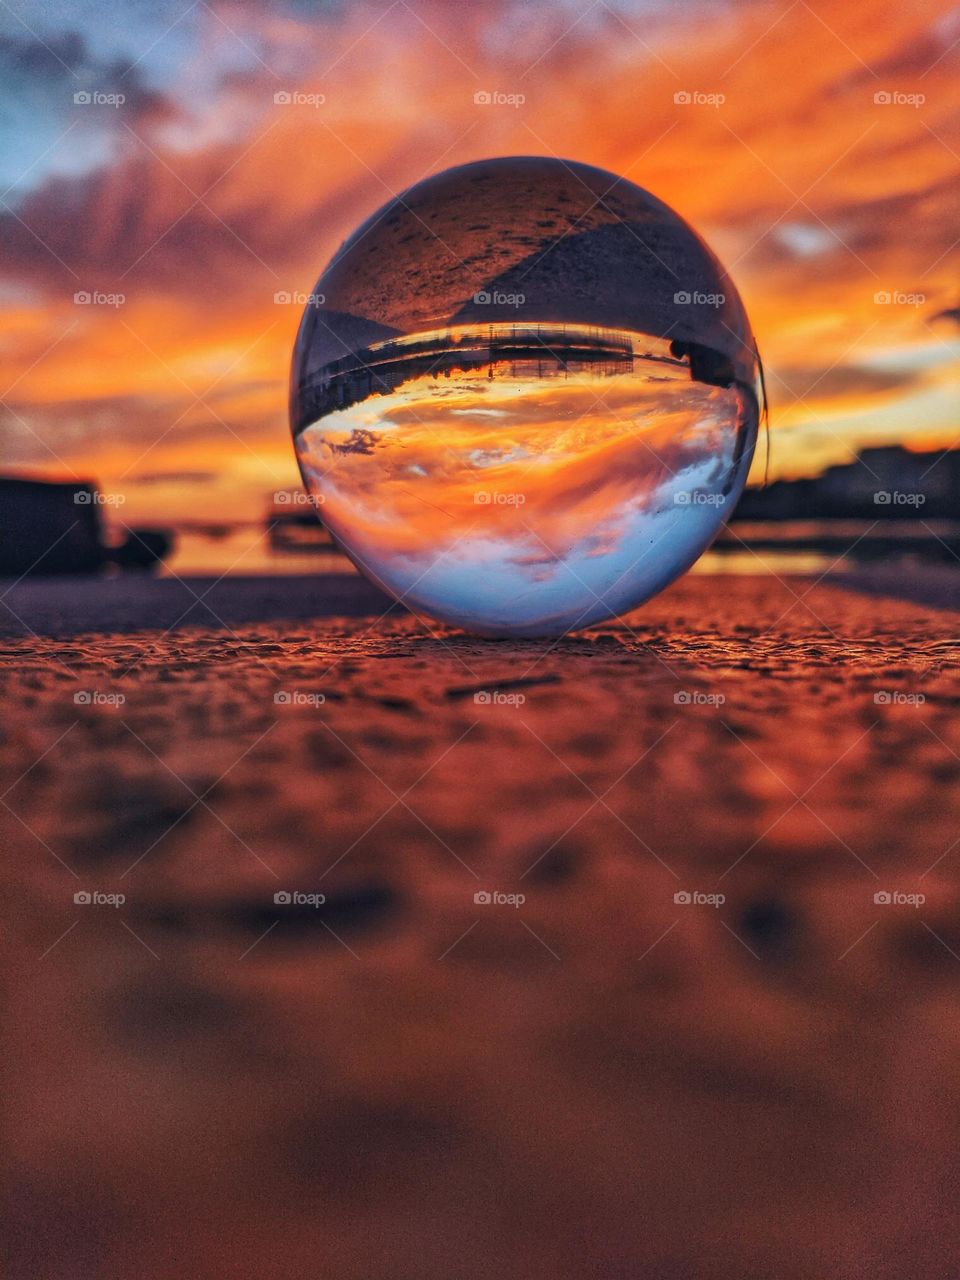 Top view of lensball, crystal ball on the beach,  seashore close up. Reflection of beautiful red sunset sky in lens ball.  Abstract